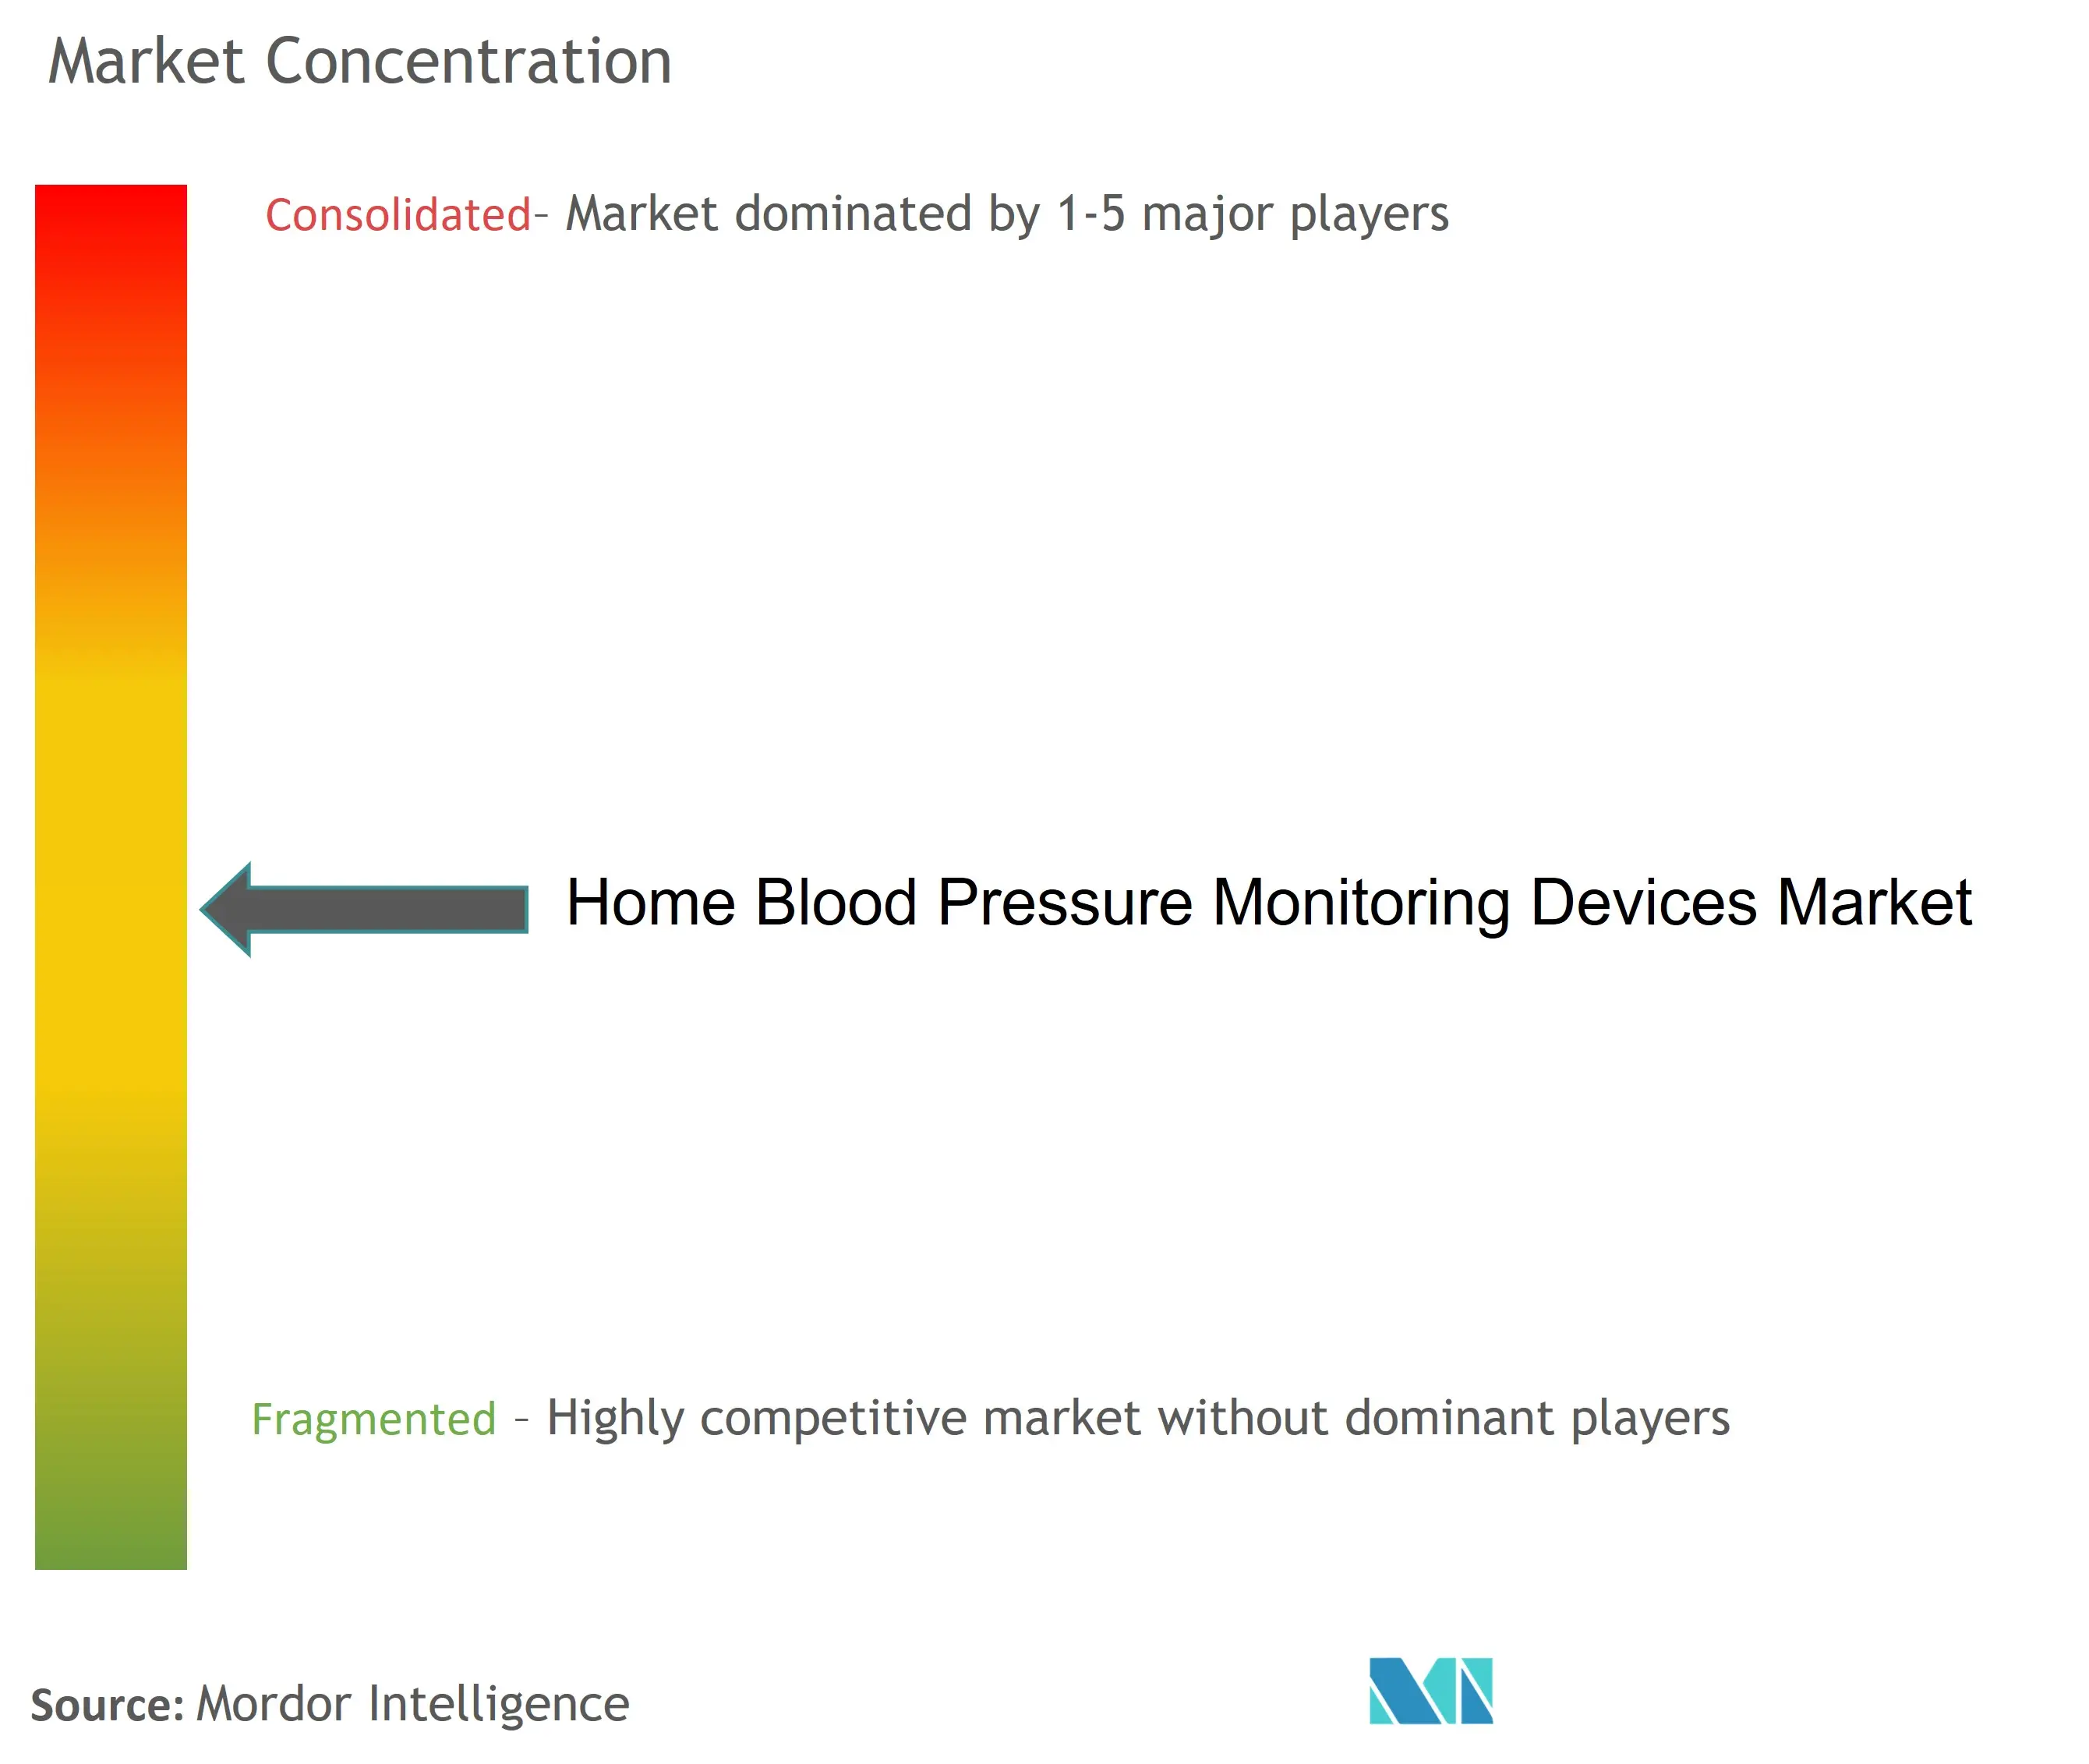 Home Blood Pressure Monitoring Devices Market Concentration